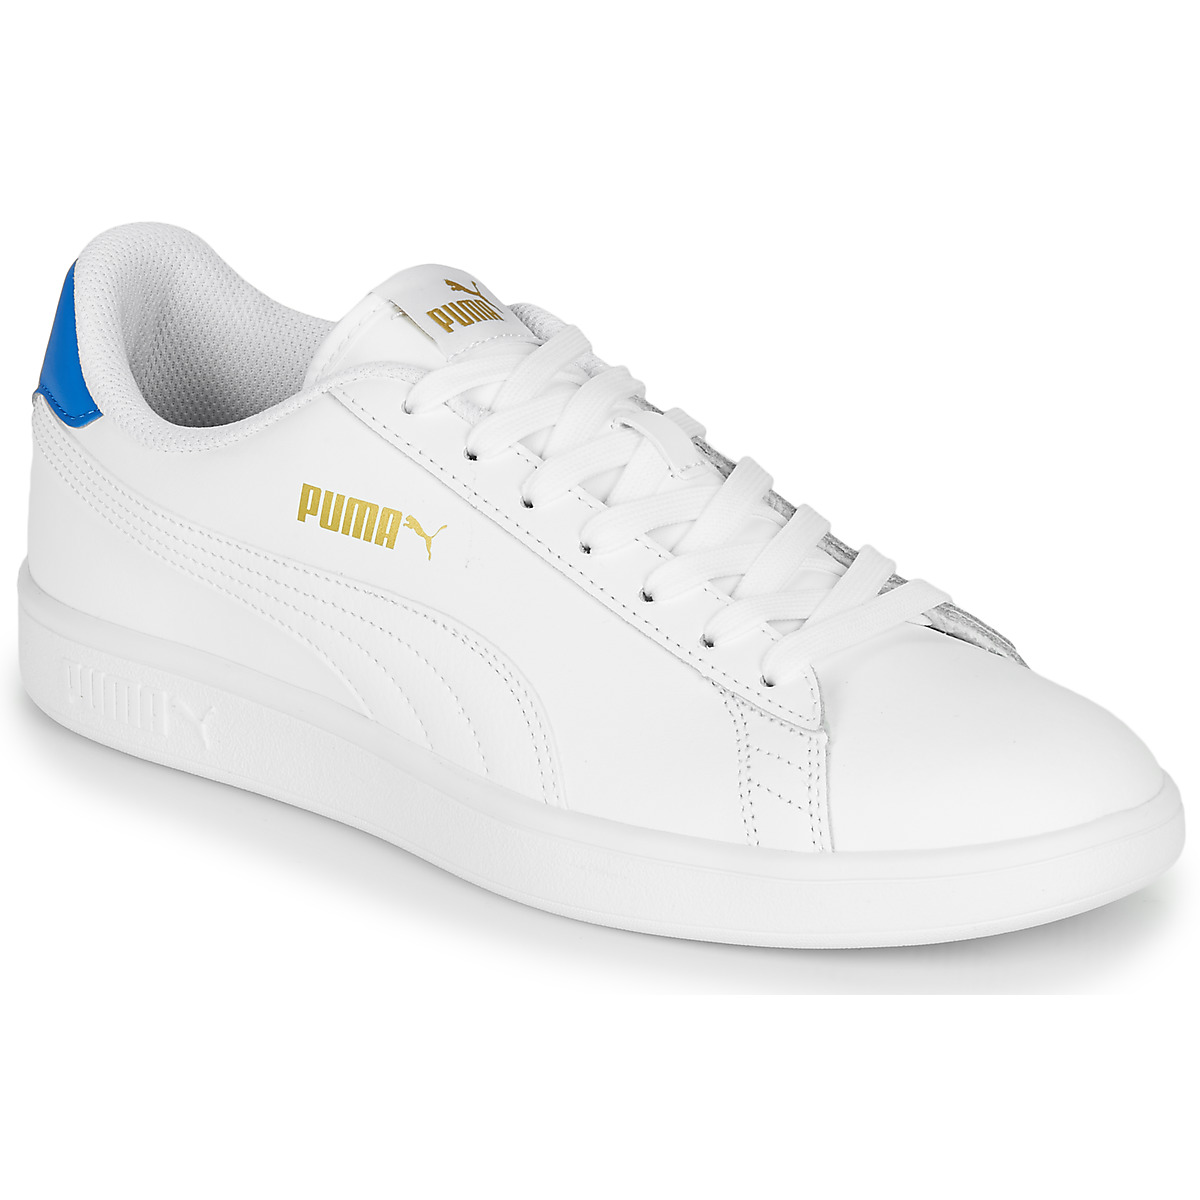 Chaussures Homme Show me all Festival Styles from PUMA PUMA SMASH V2L Blanc